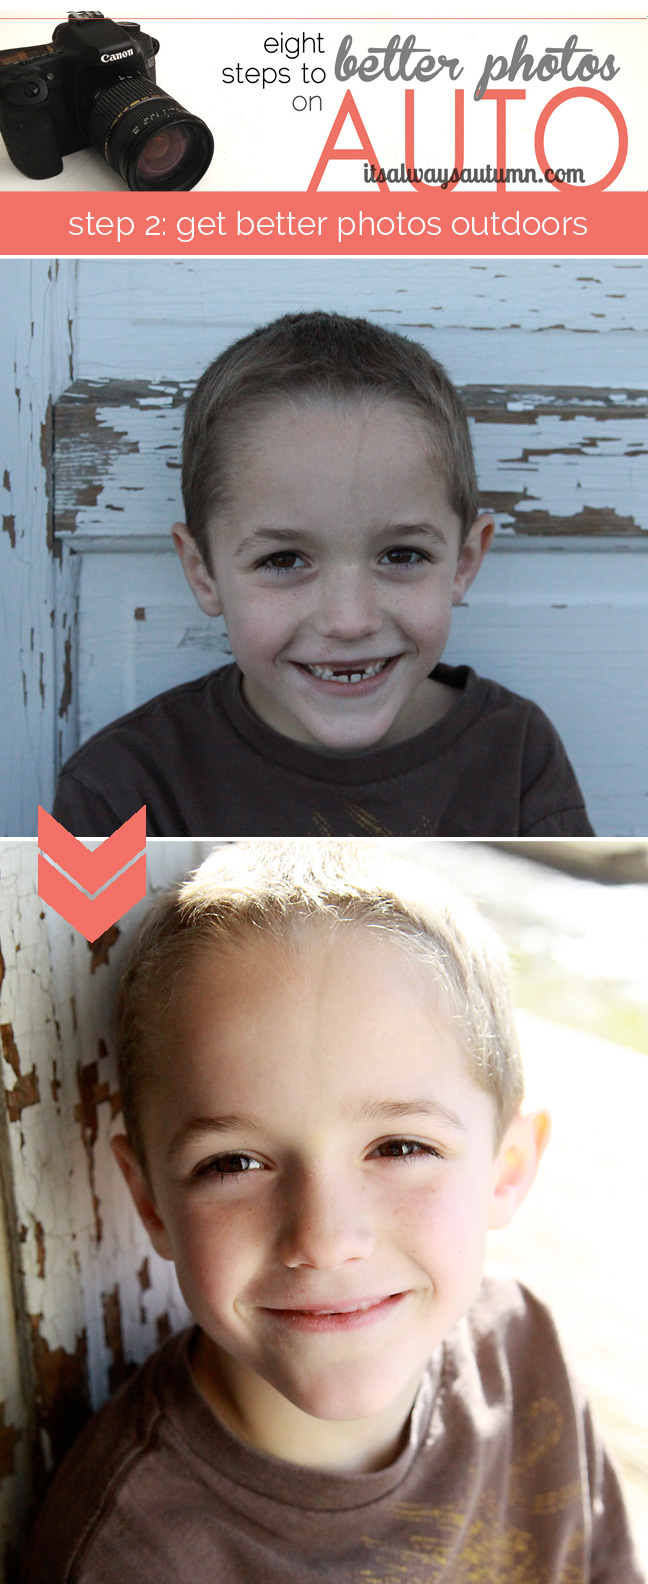 A photo of a young boy taken outside with flat blue light, then a photo of same boy with pleasant golden side lighting